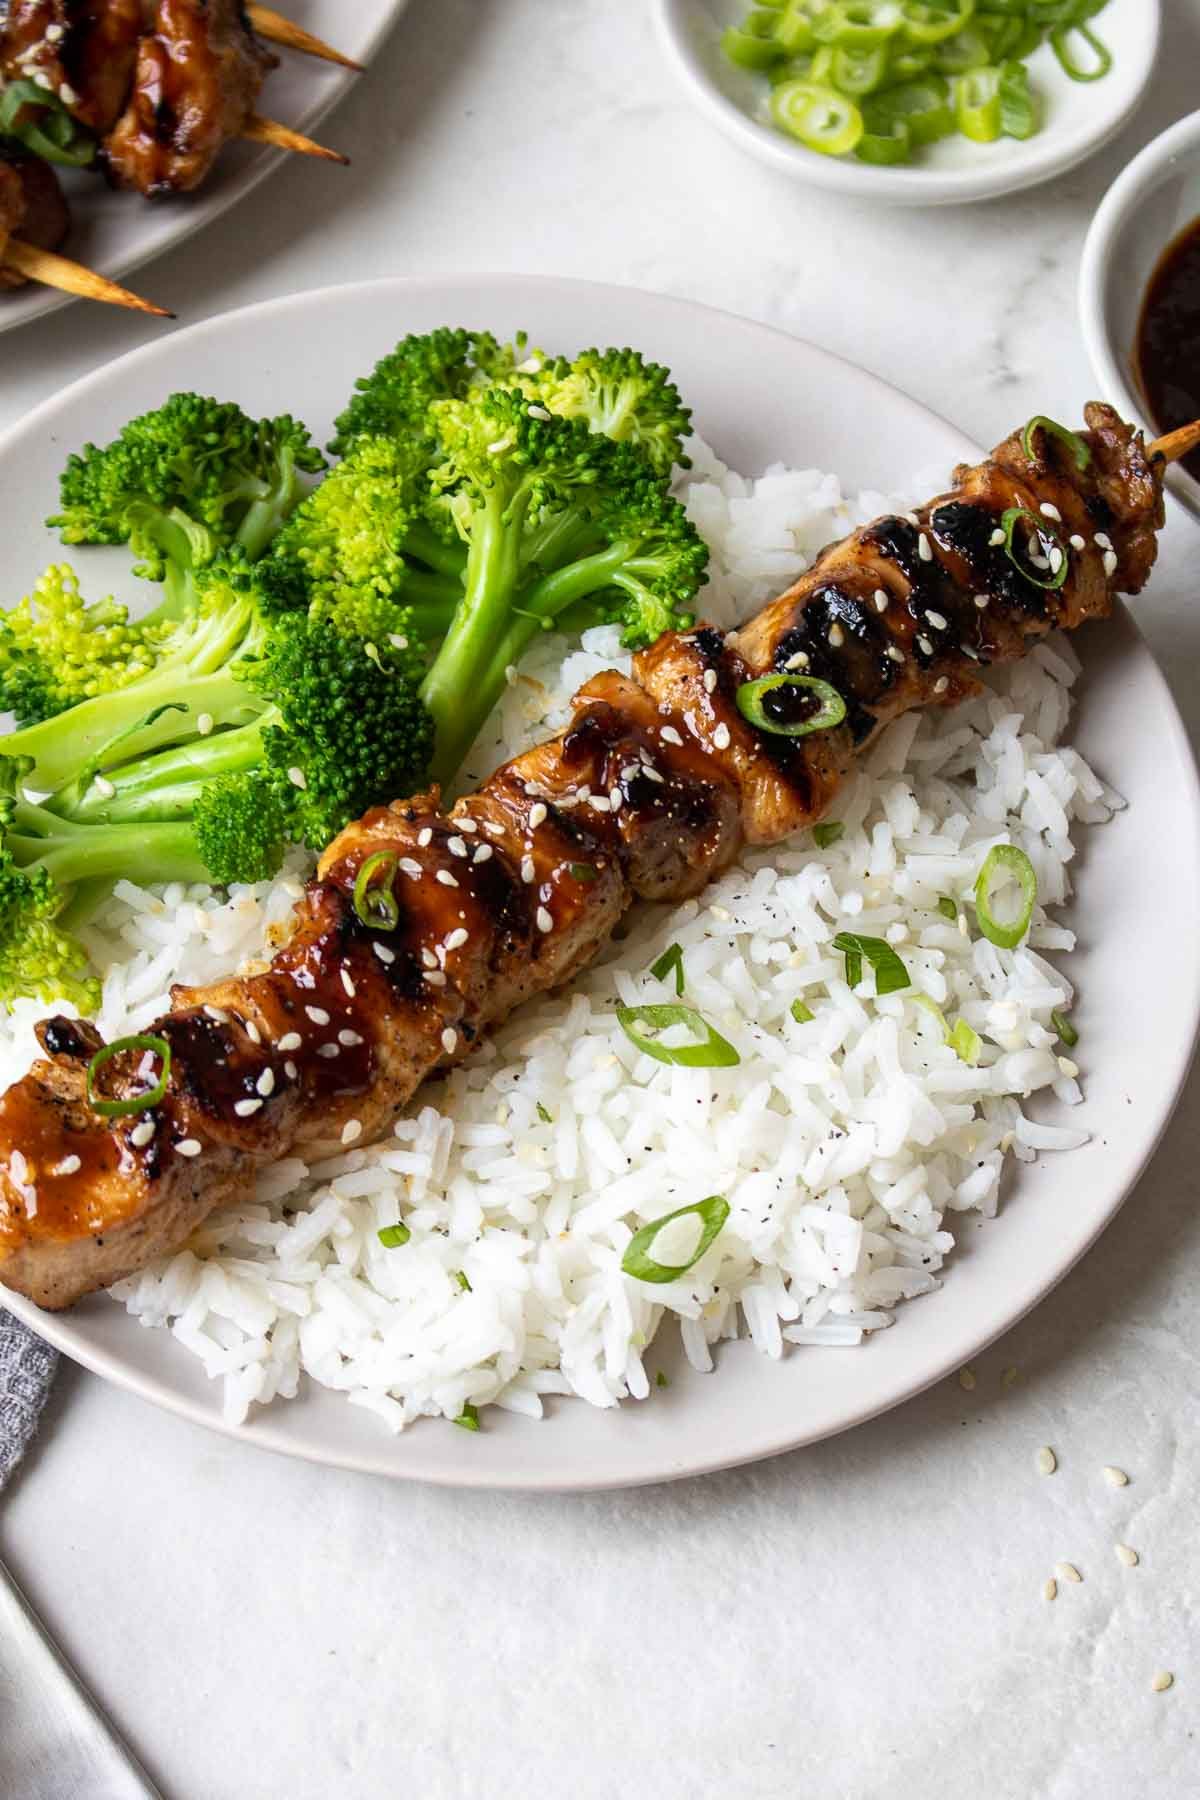 Grilled teriyaki chicken skewer on a plate with rice and broccoli.